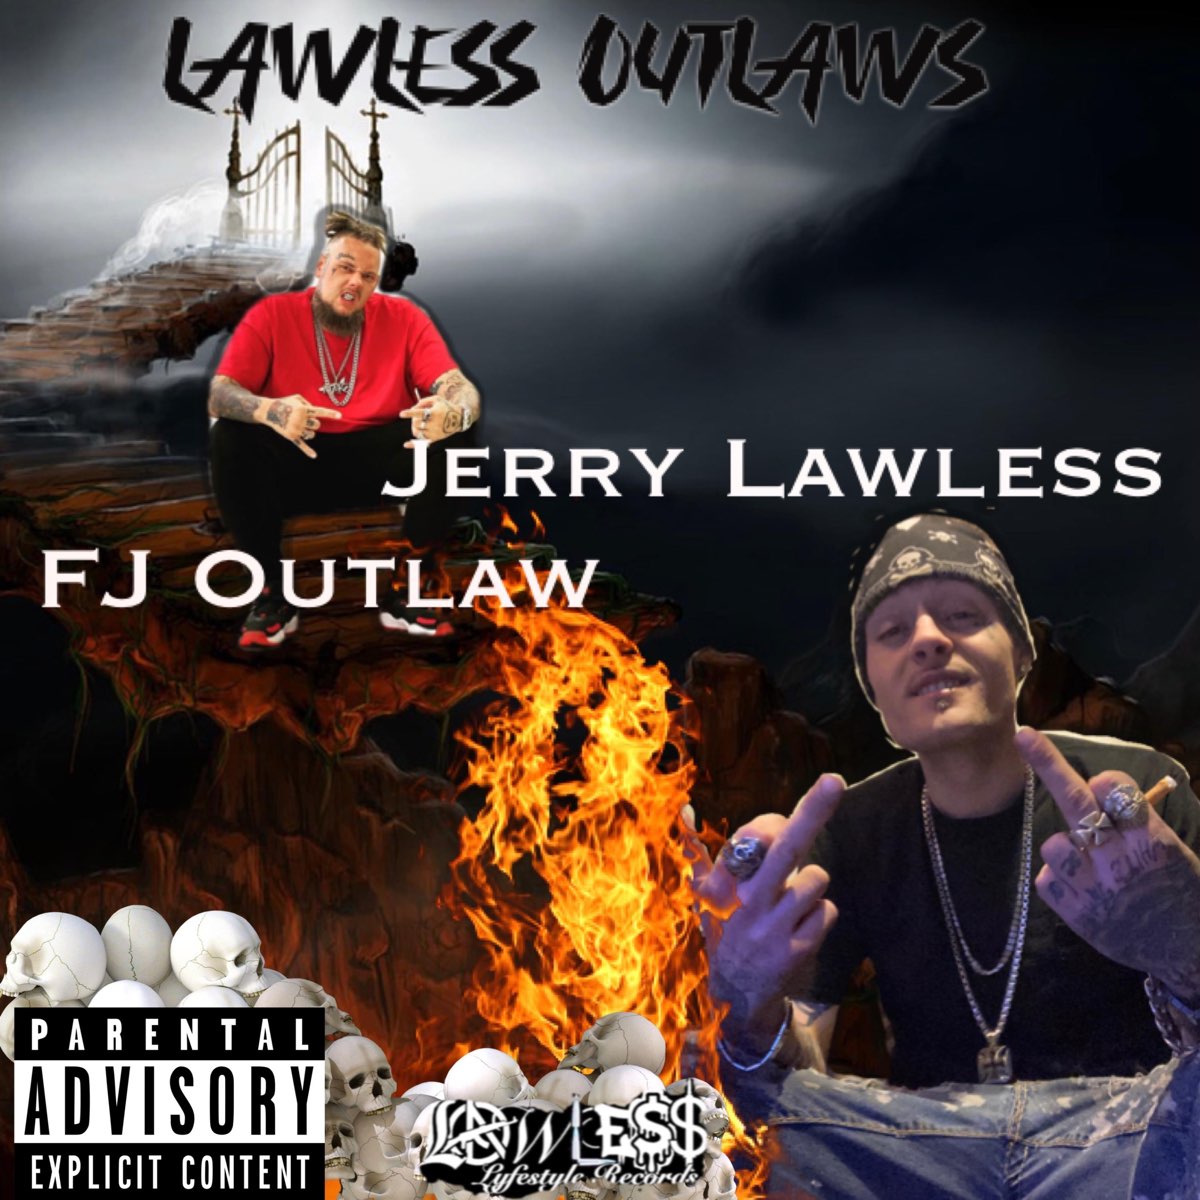 ‎Lawless Outlaws (feat. FJ Outlaw) Single by Jerry Lawless on Apple Music